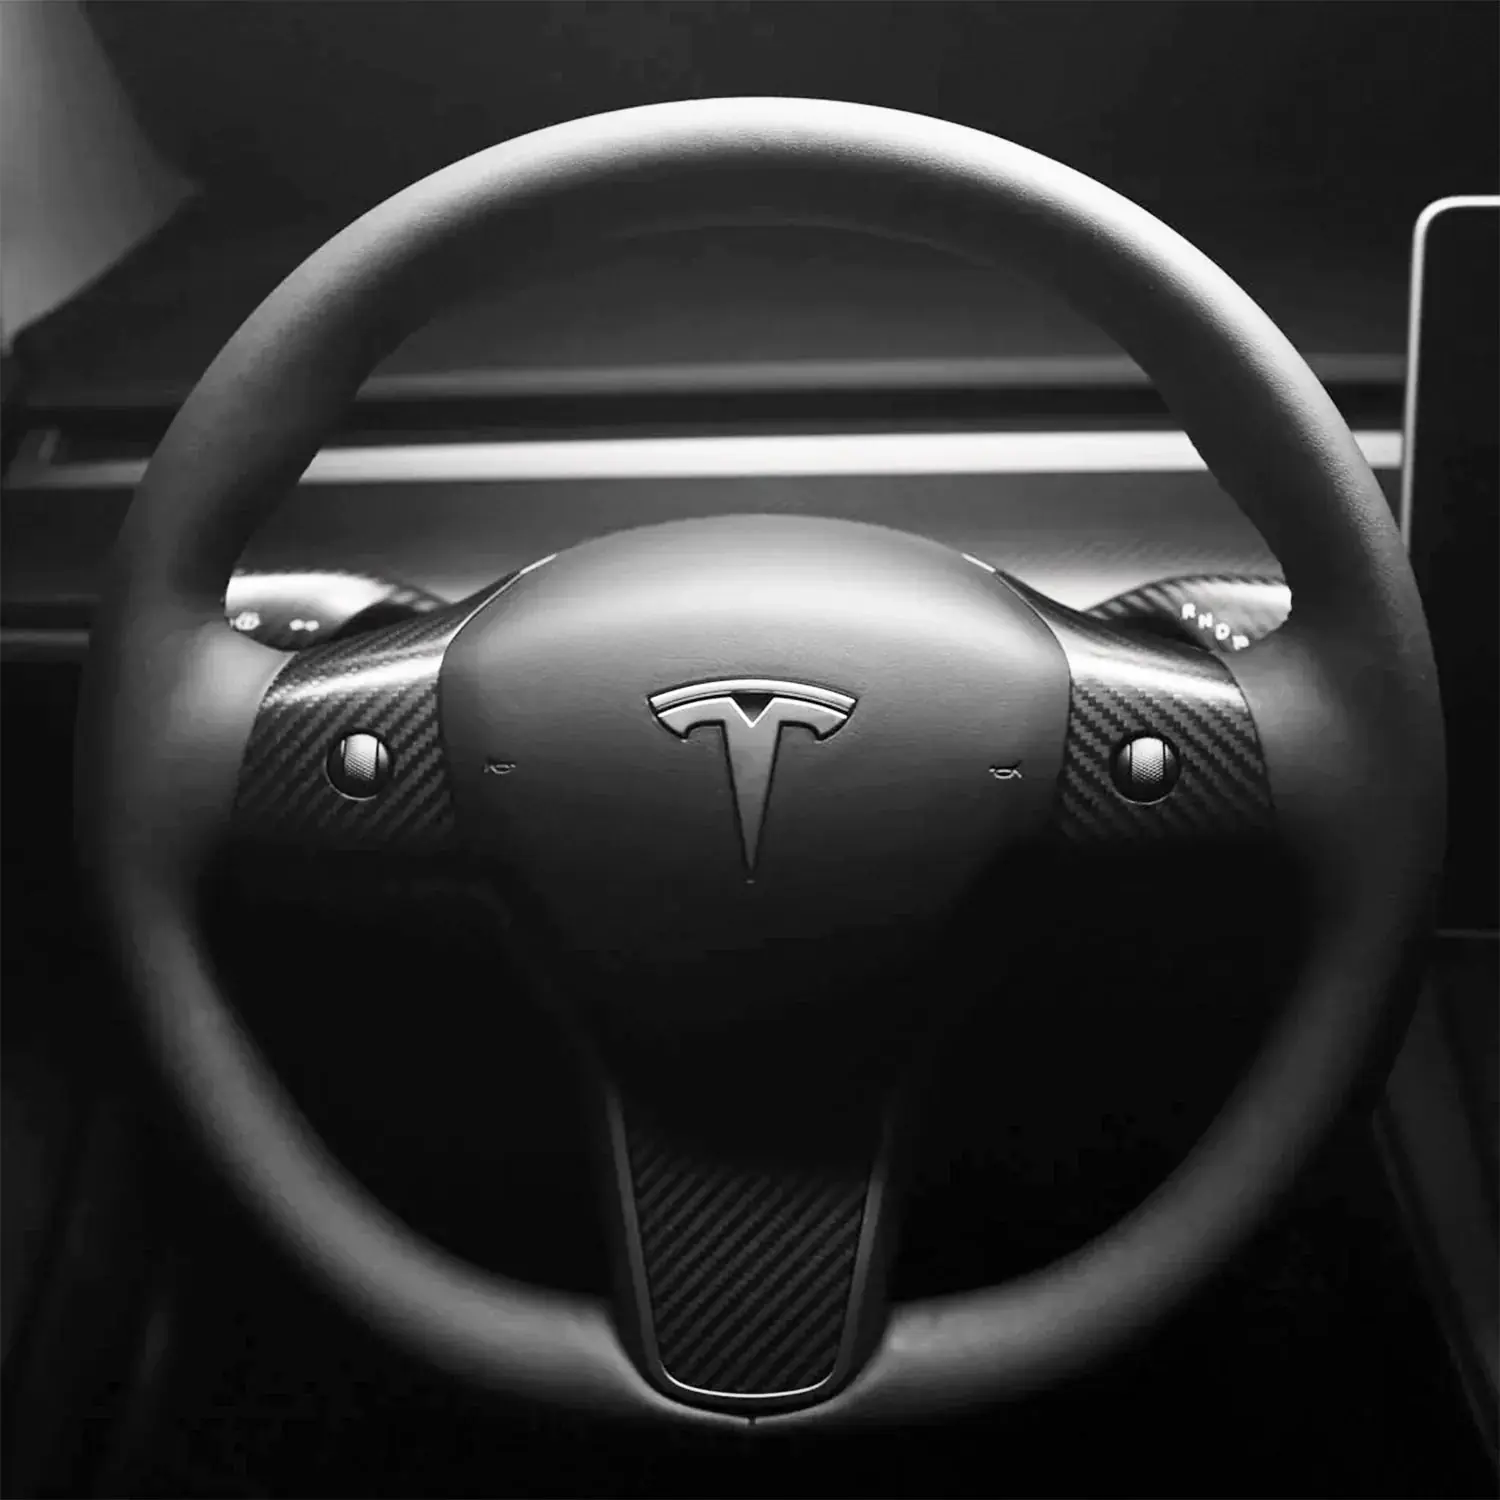 Upgrade the Look of Your Tesla Model 3/Y with Adreama's Real Carbon Fiber Steering Wheel Accents